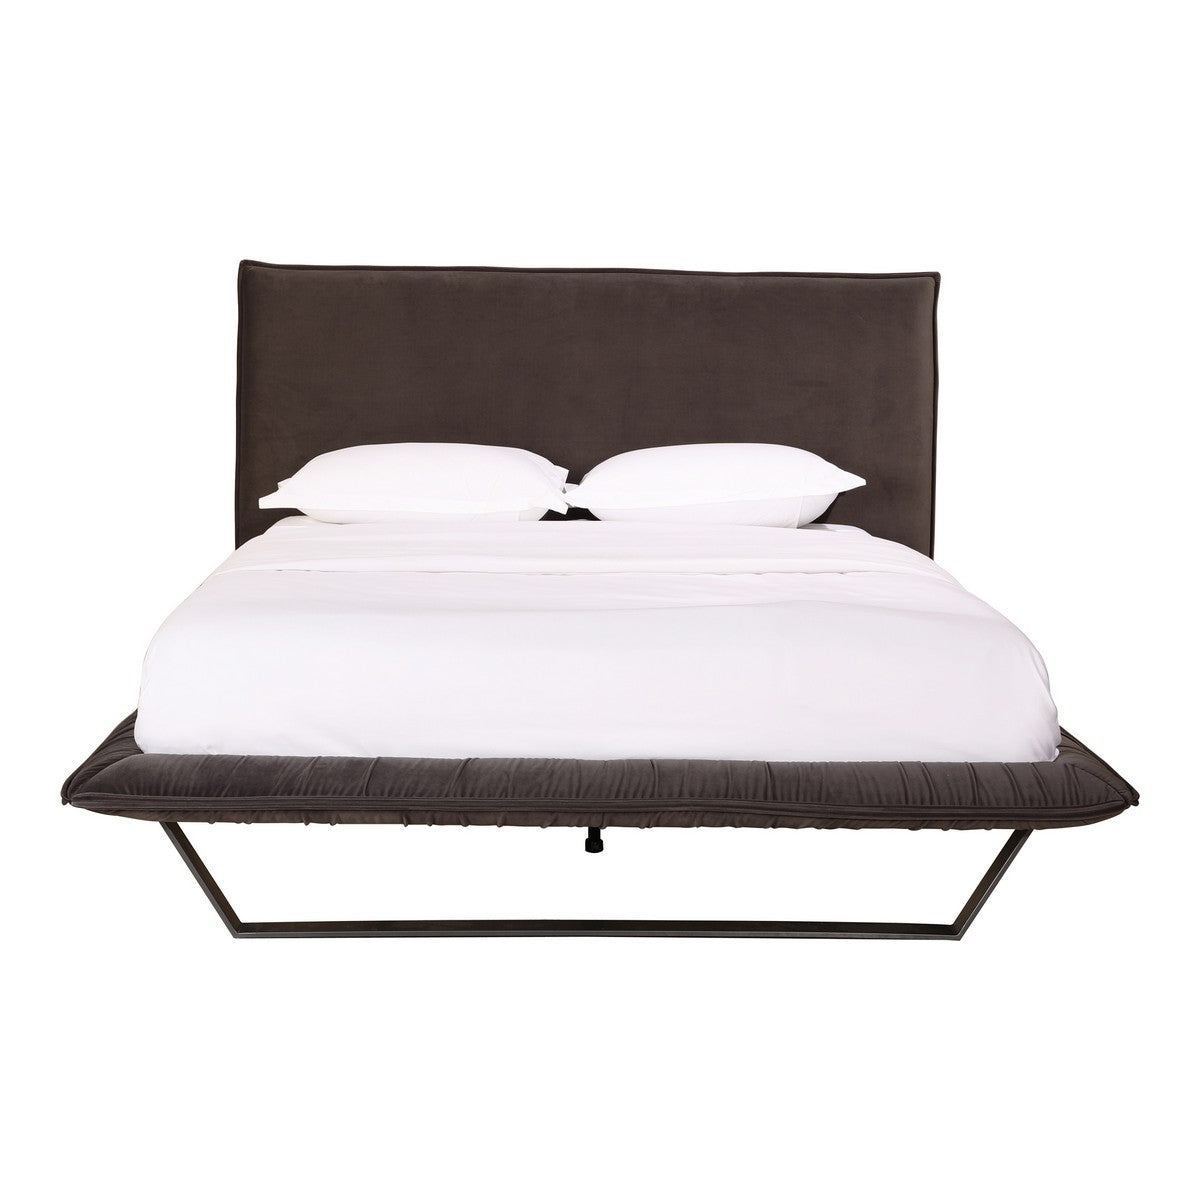 Moe's Home Collection Manilla Queen Bed Slate - RN-1127-25